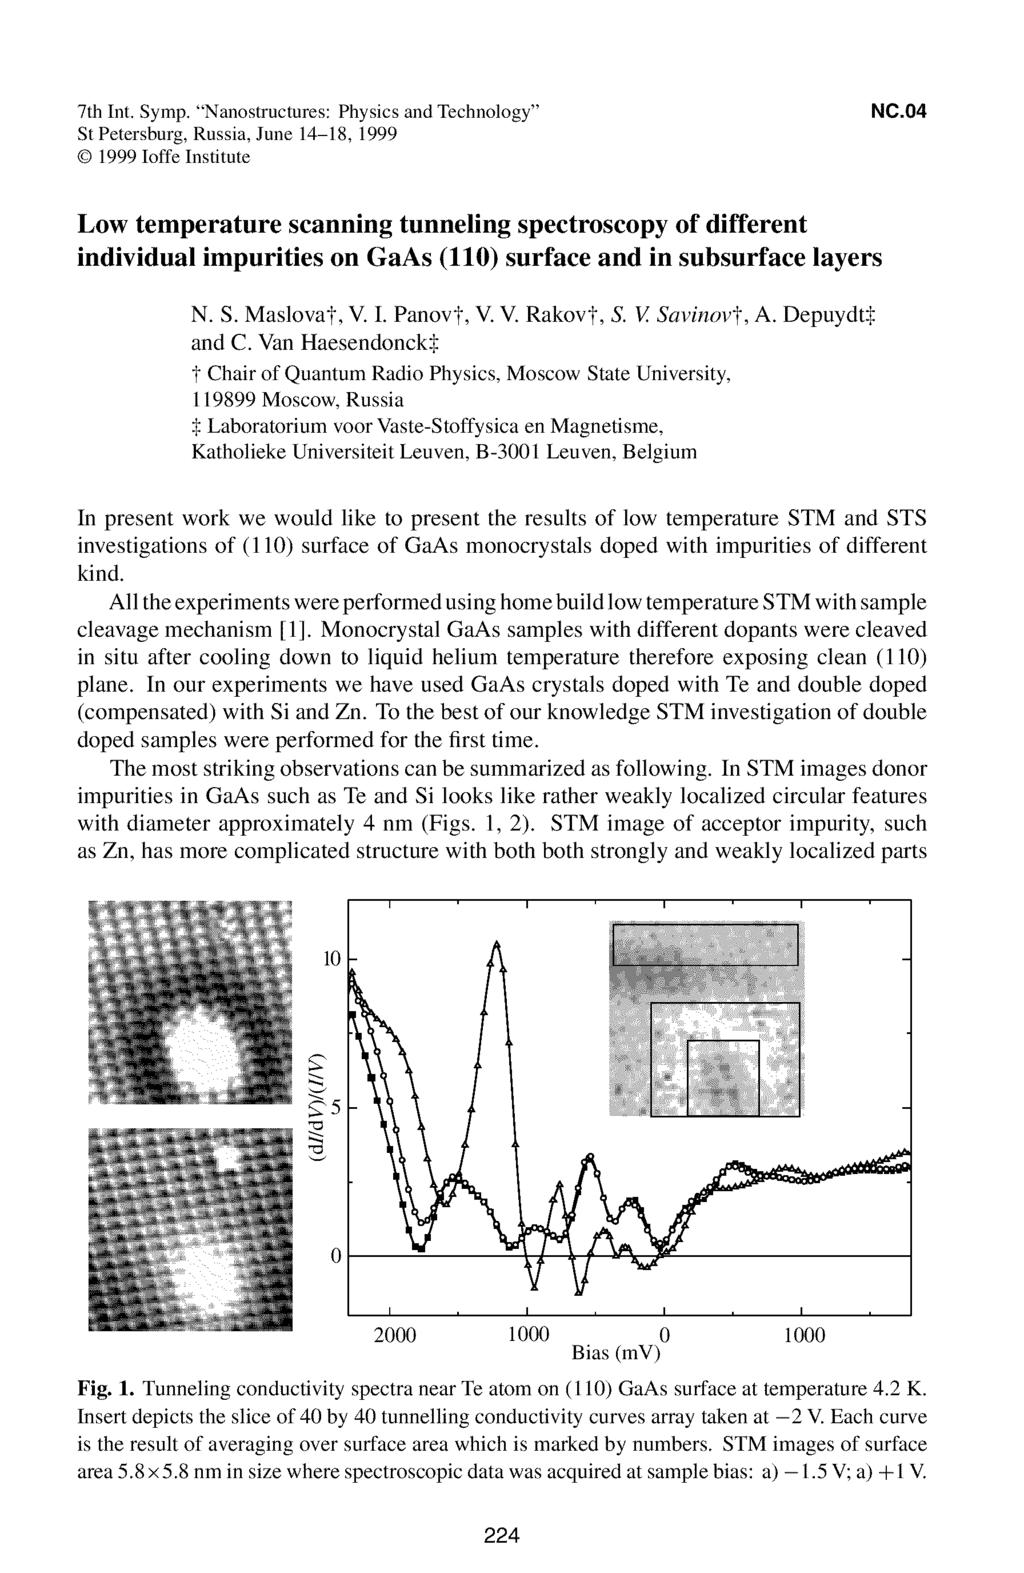 7th Int. Symp. "Nanostructures: Physics and Technology" St Petersburg, Russia, June 14-18, 1999 1999 loffe Institute NC.